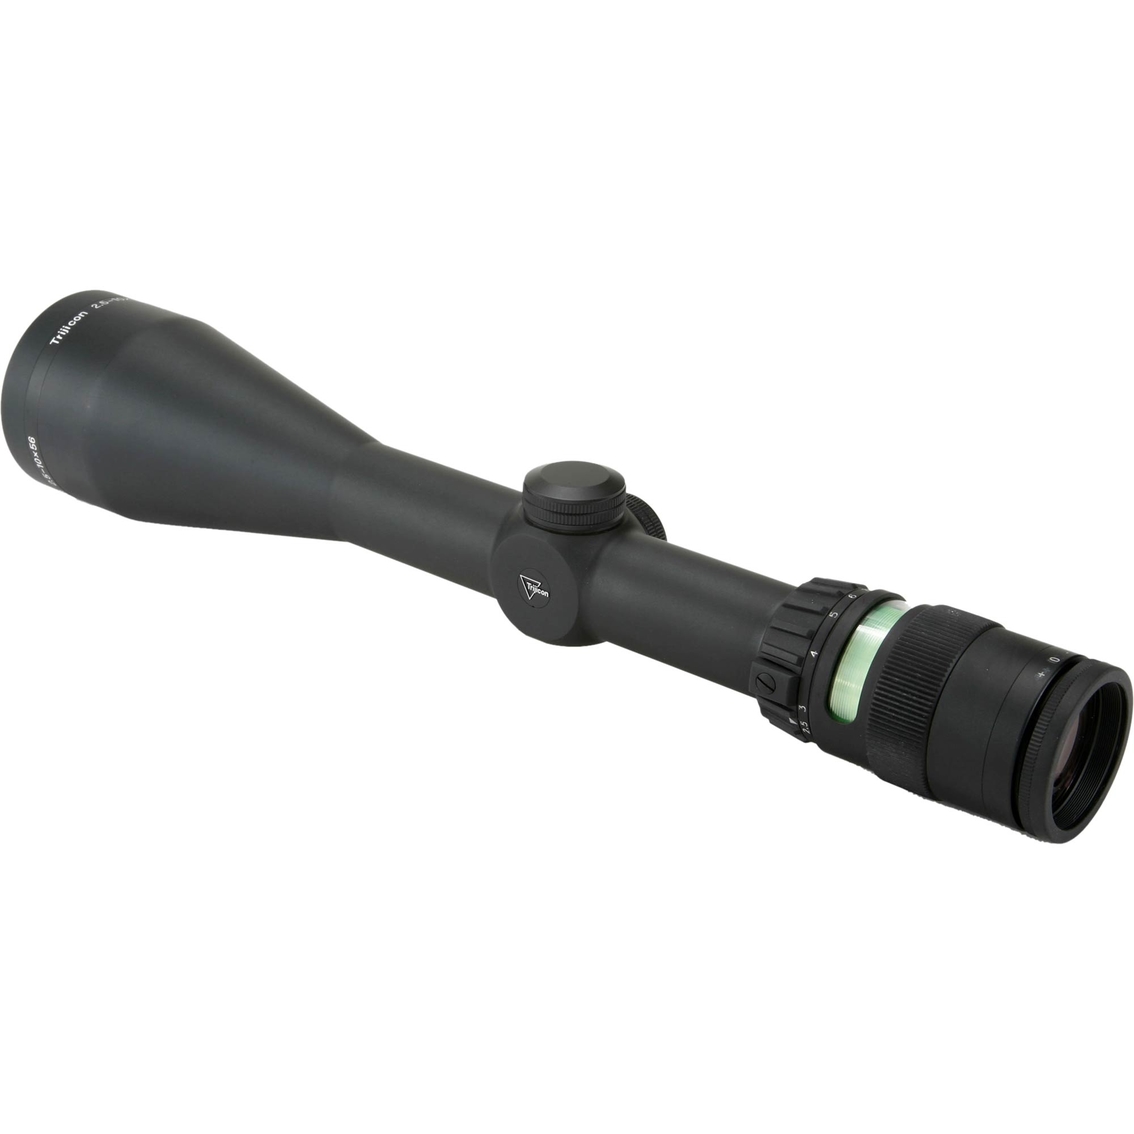 Trijicon Accupoint 2.5-10x56 Green MDT Riflescope - Image 4 of 5